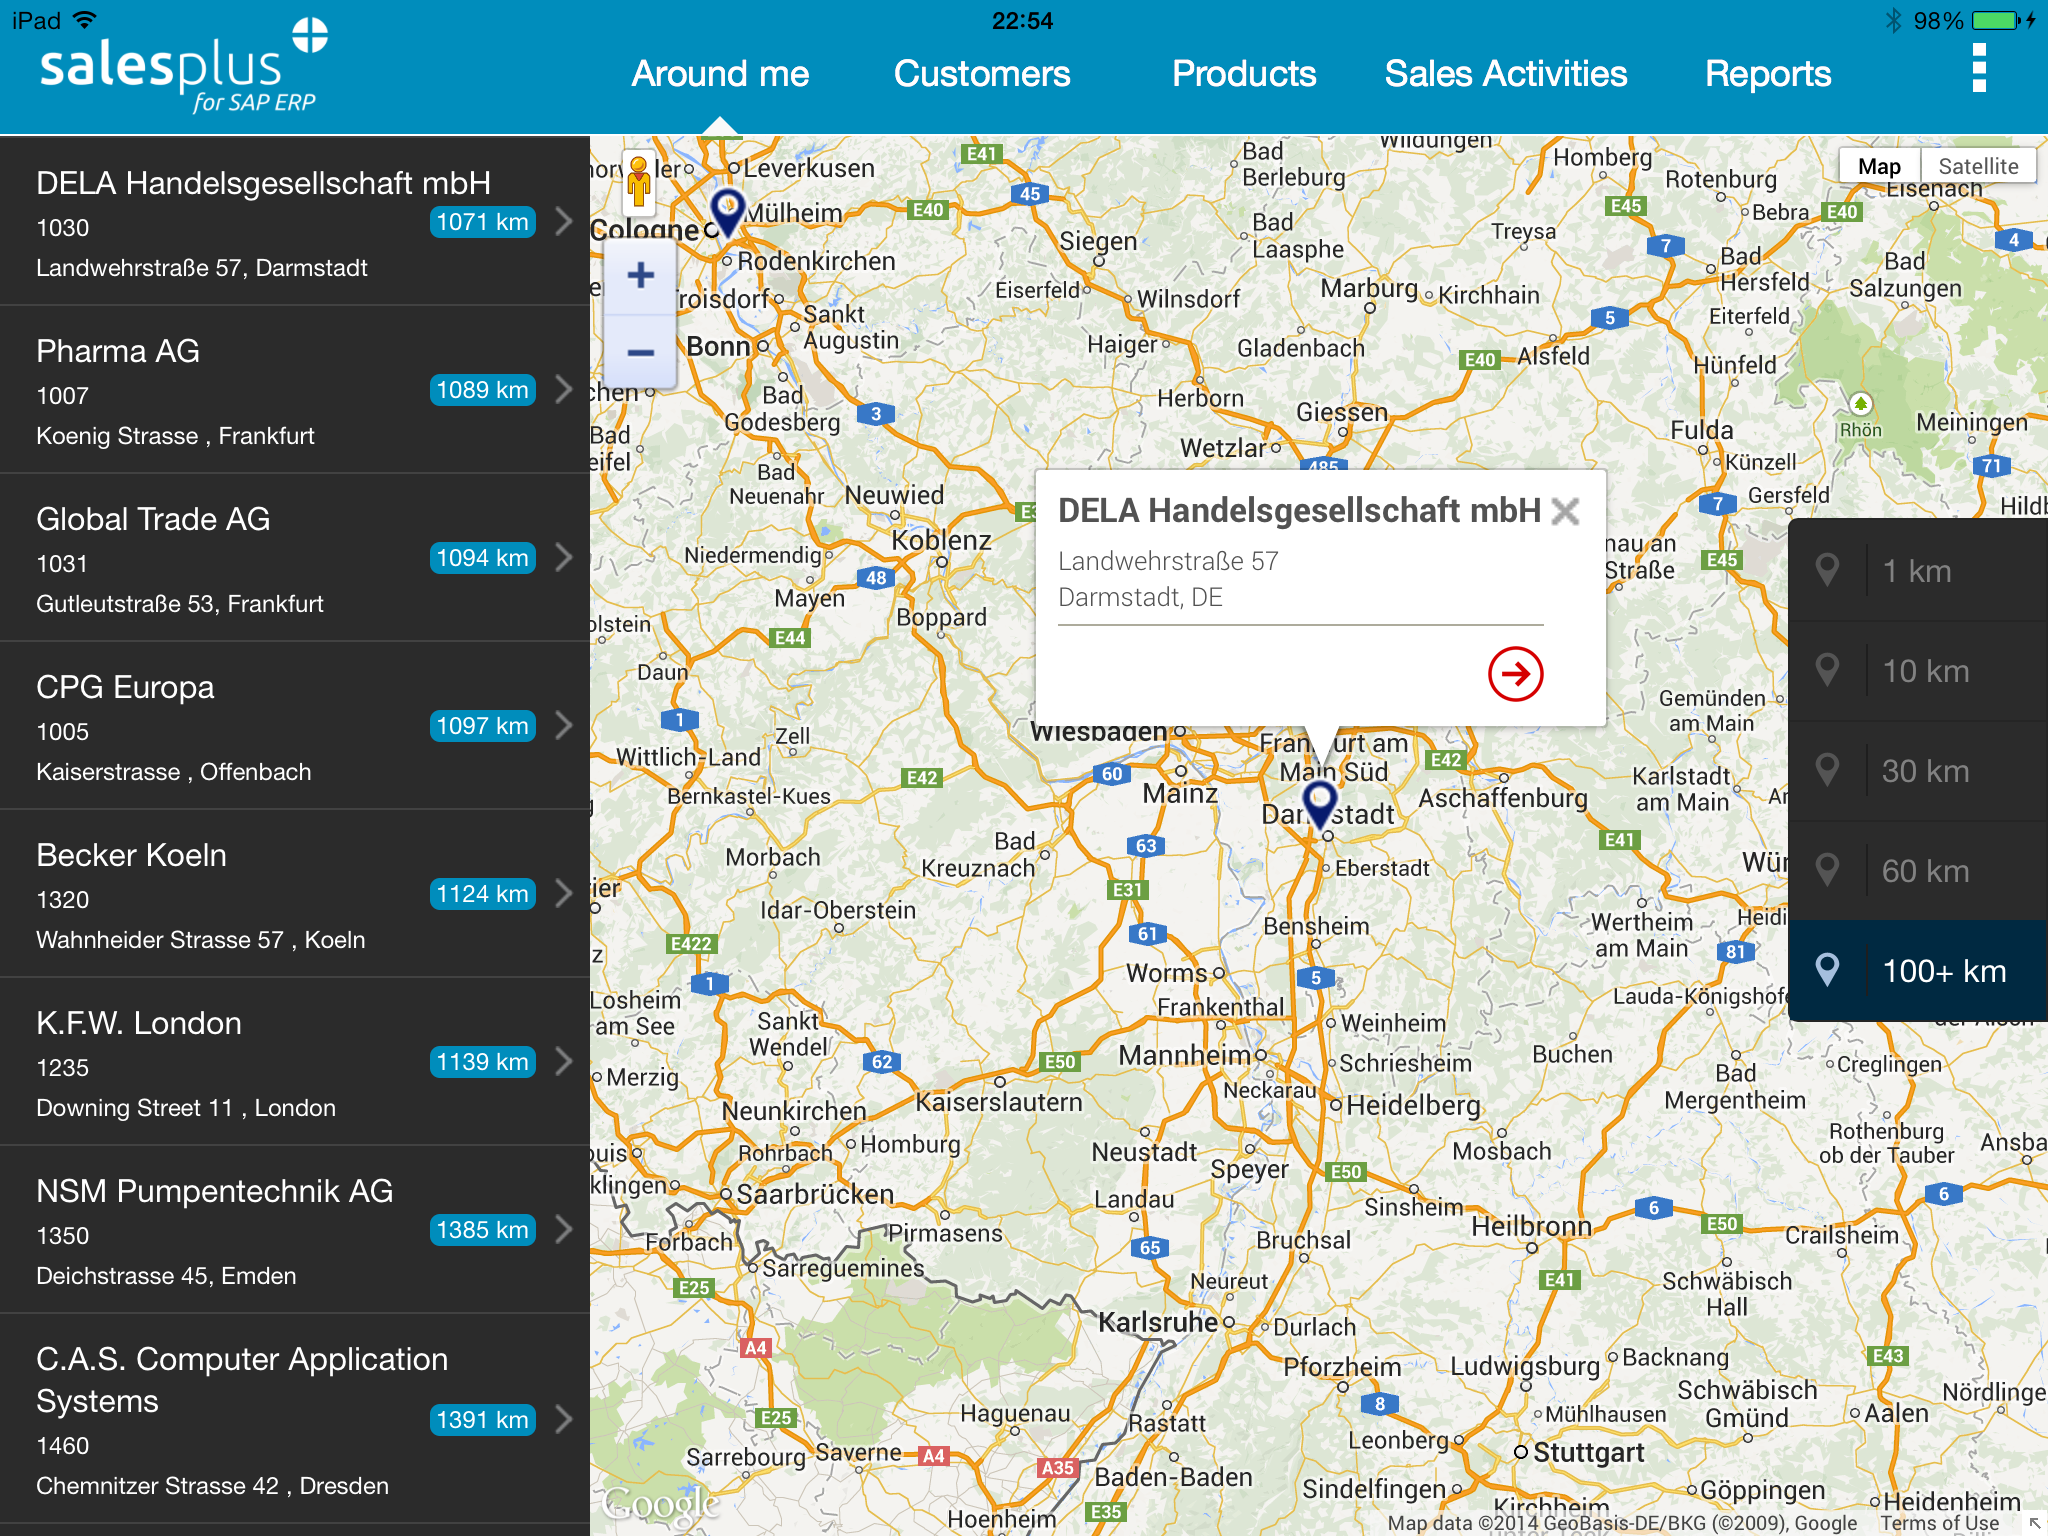 Sales Plus for SAP ERP - an mobile offline solution for SAP customers running on iPhone, iPad, Android and Windows